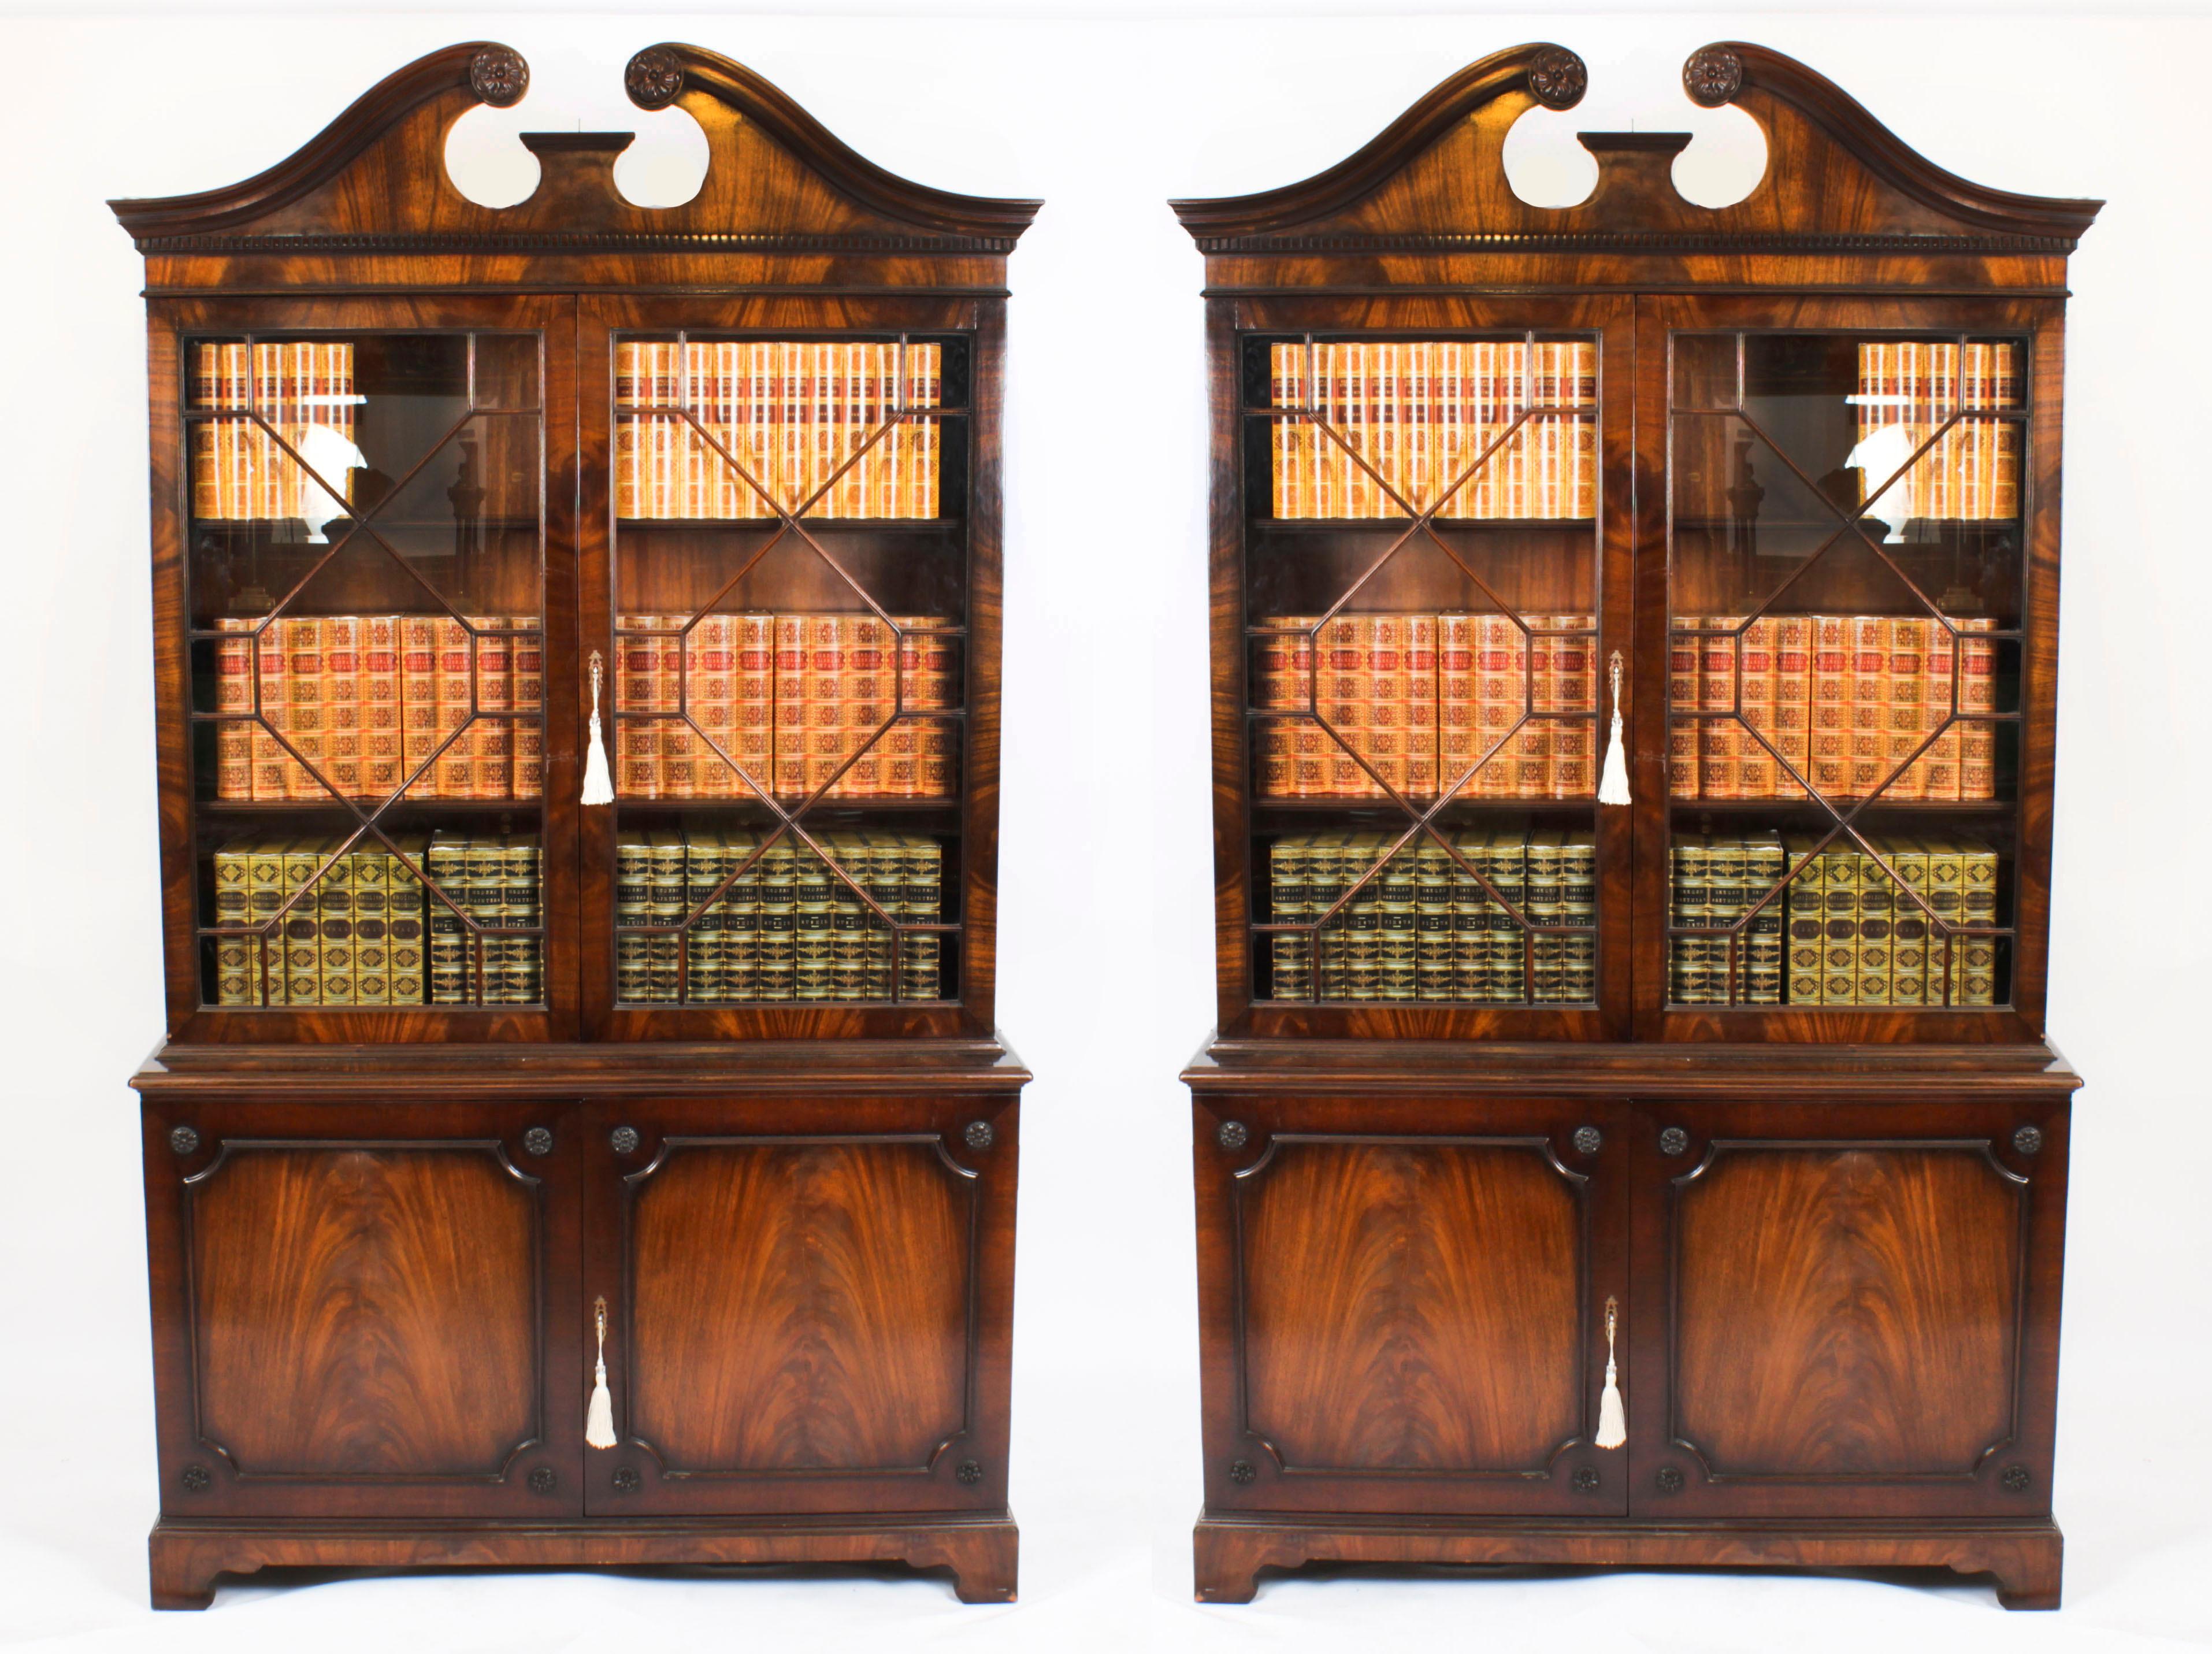 This is a superb and decorative vintage pair of Georgian revival flame mahogany bookcases, Mid 20th century in date.

The bookcases feature swan neck pediments above dentil moulding, and astragal glazed doors in the upper section revealing